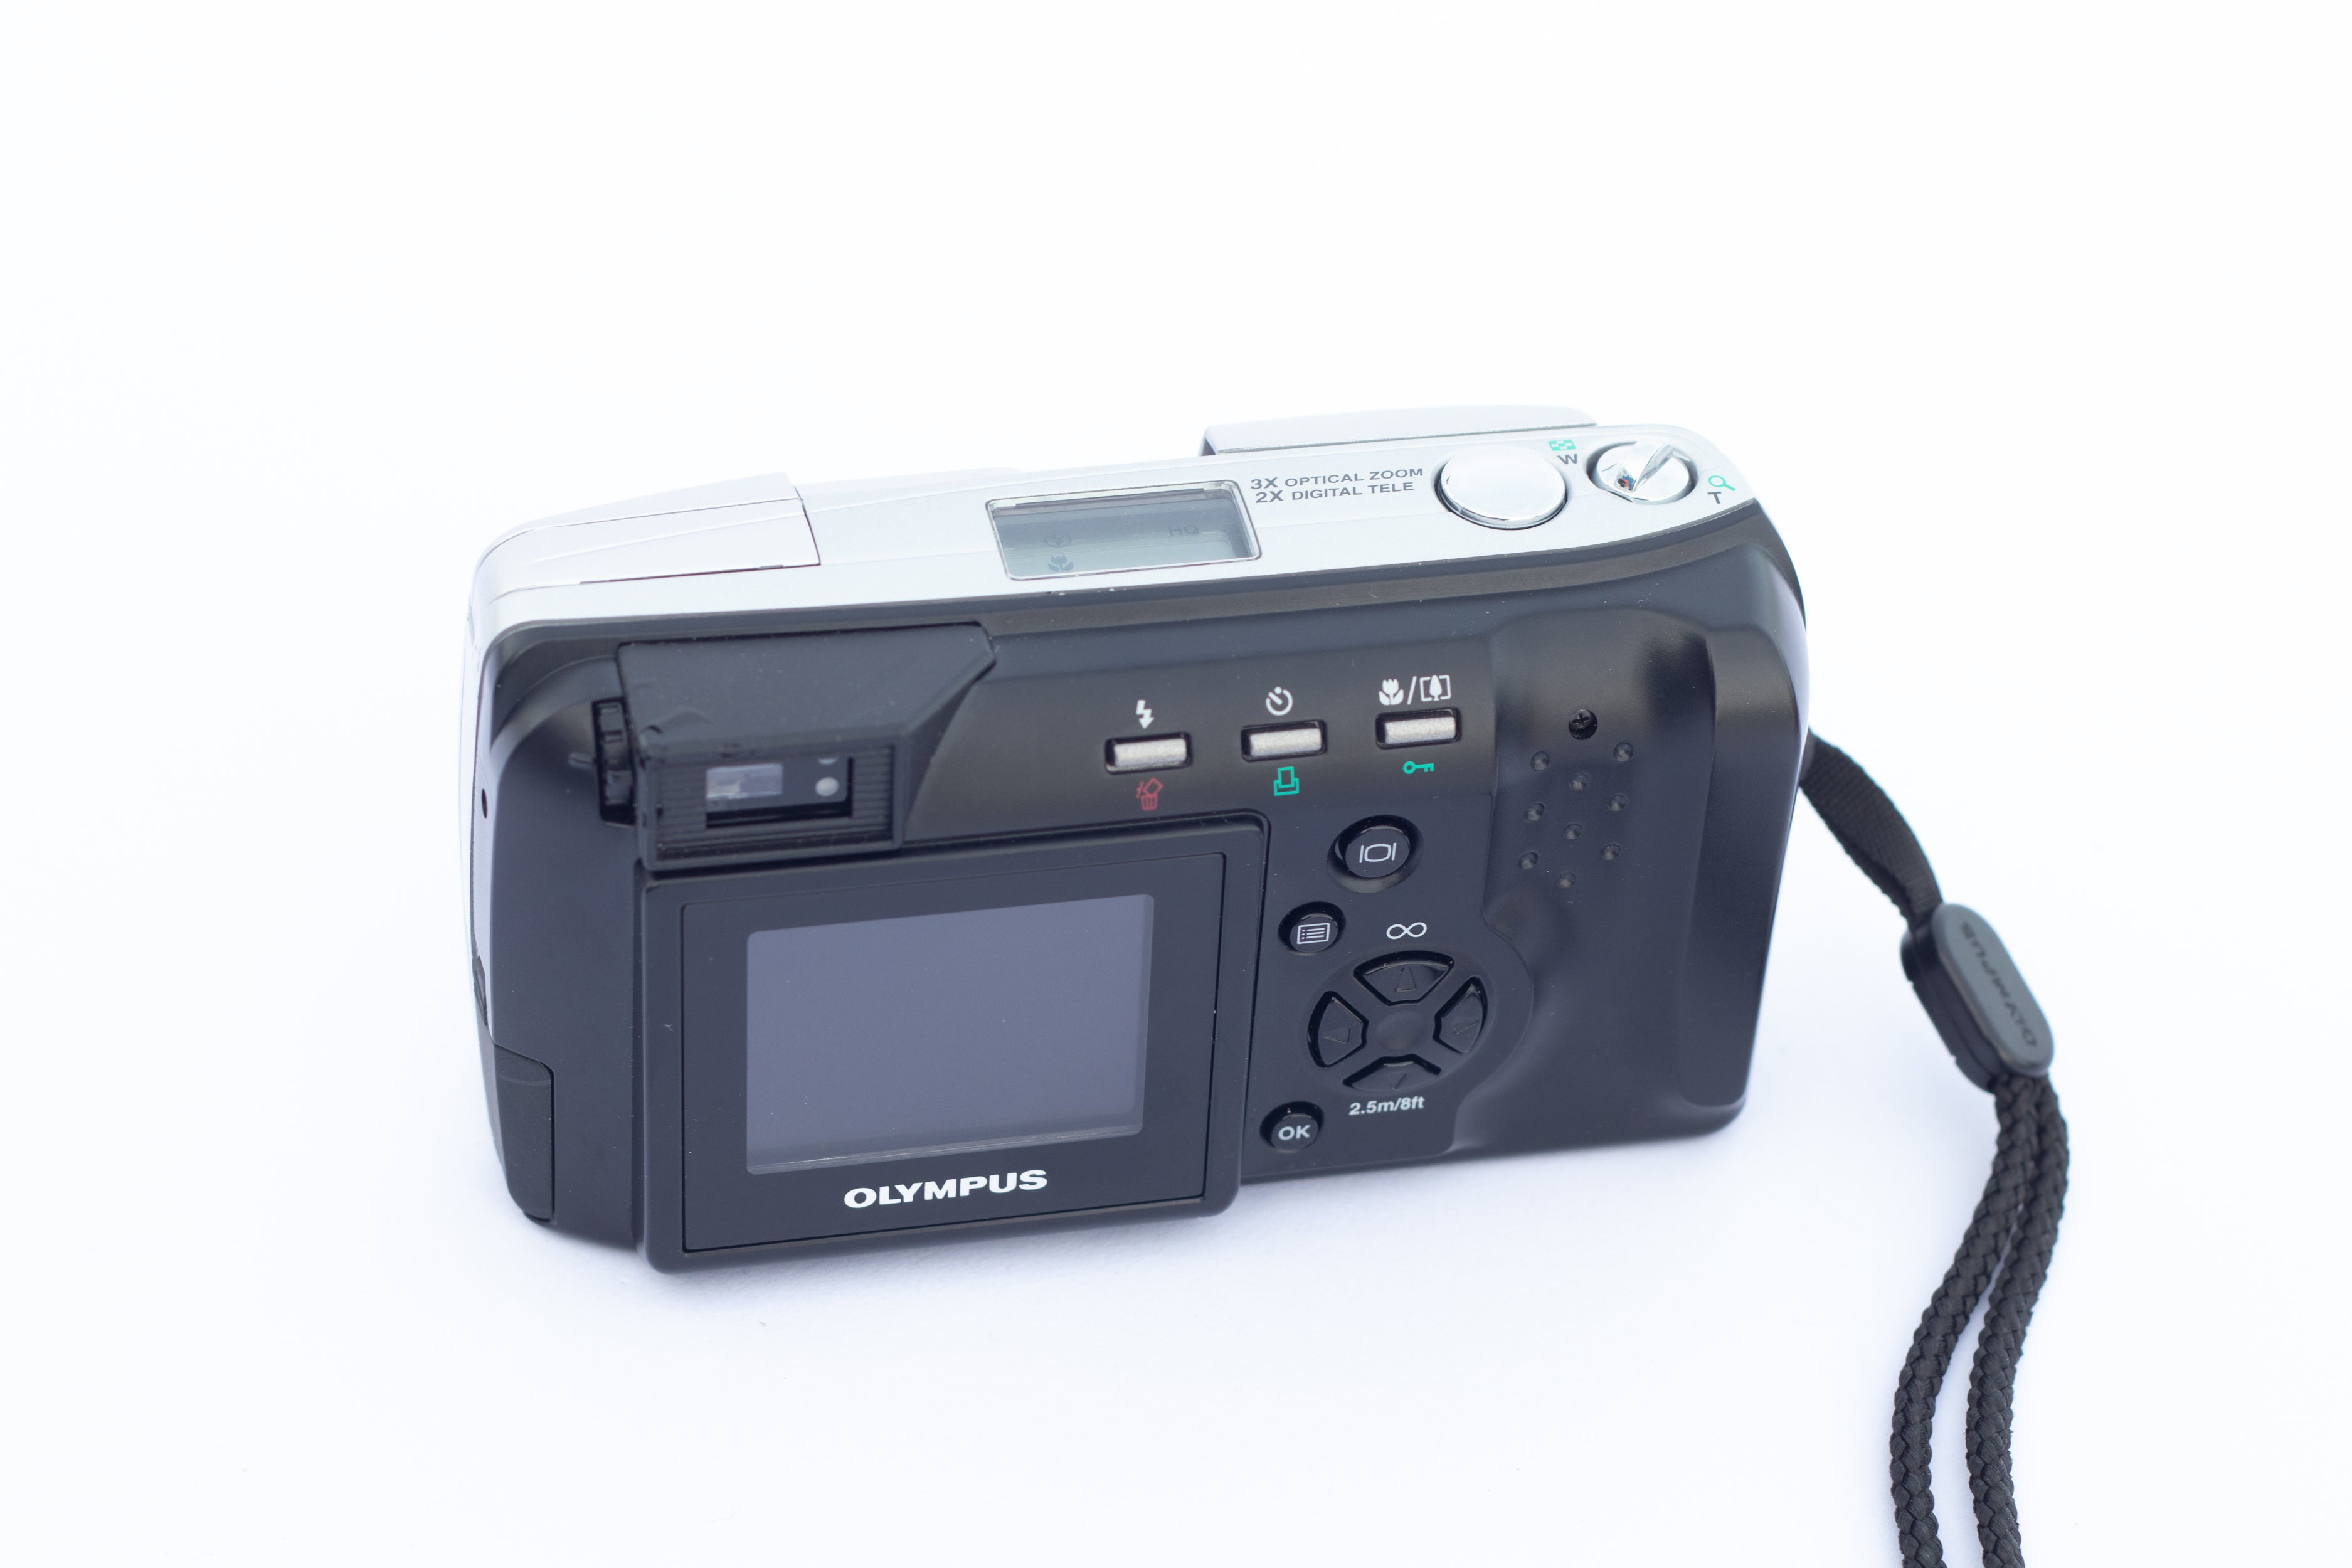 Olympus D-460 Digital Point & Shoot | 3X Zoom 1.3 Megapixel | With